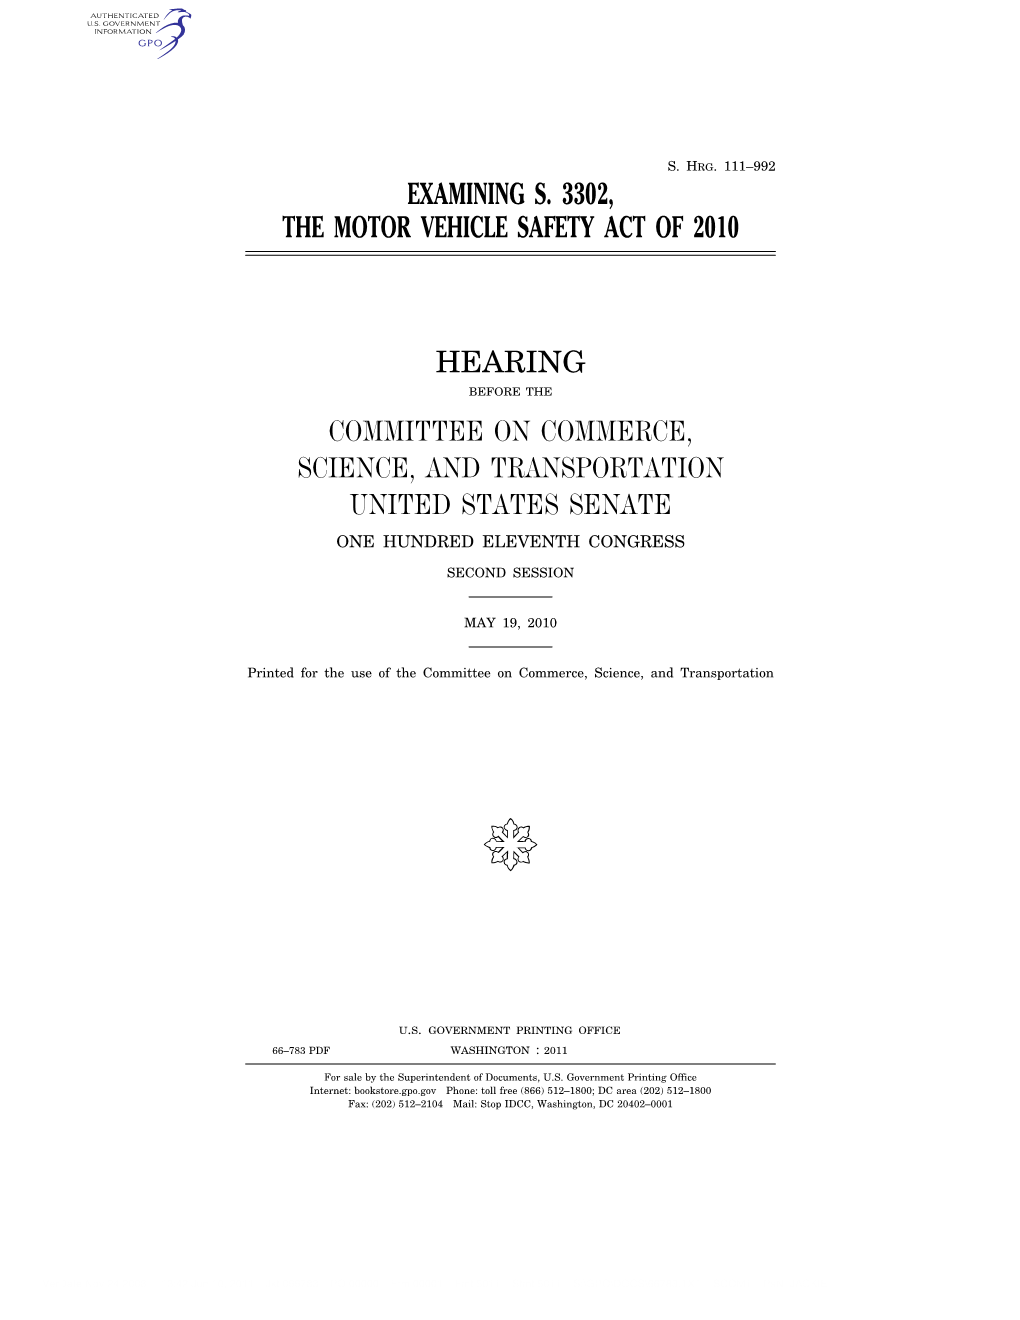 Examining S. 3302, the Motor Vehicle Safety Act of 2010